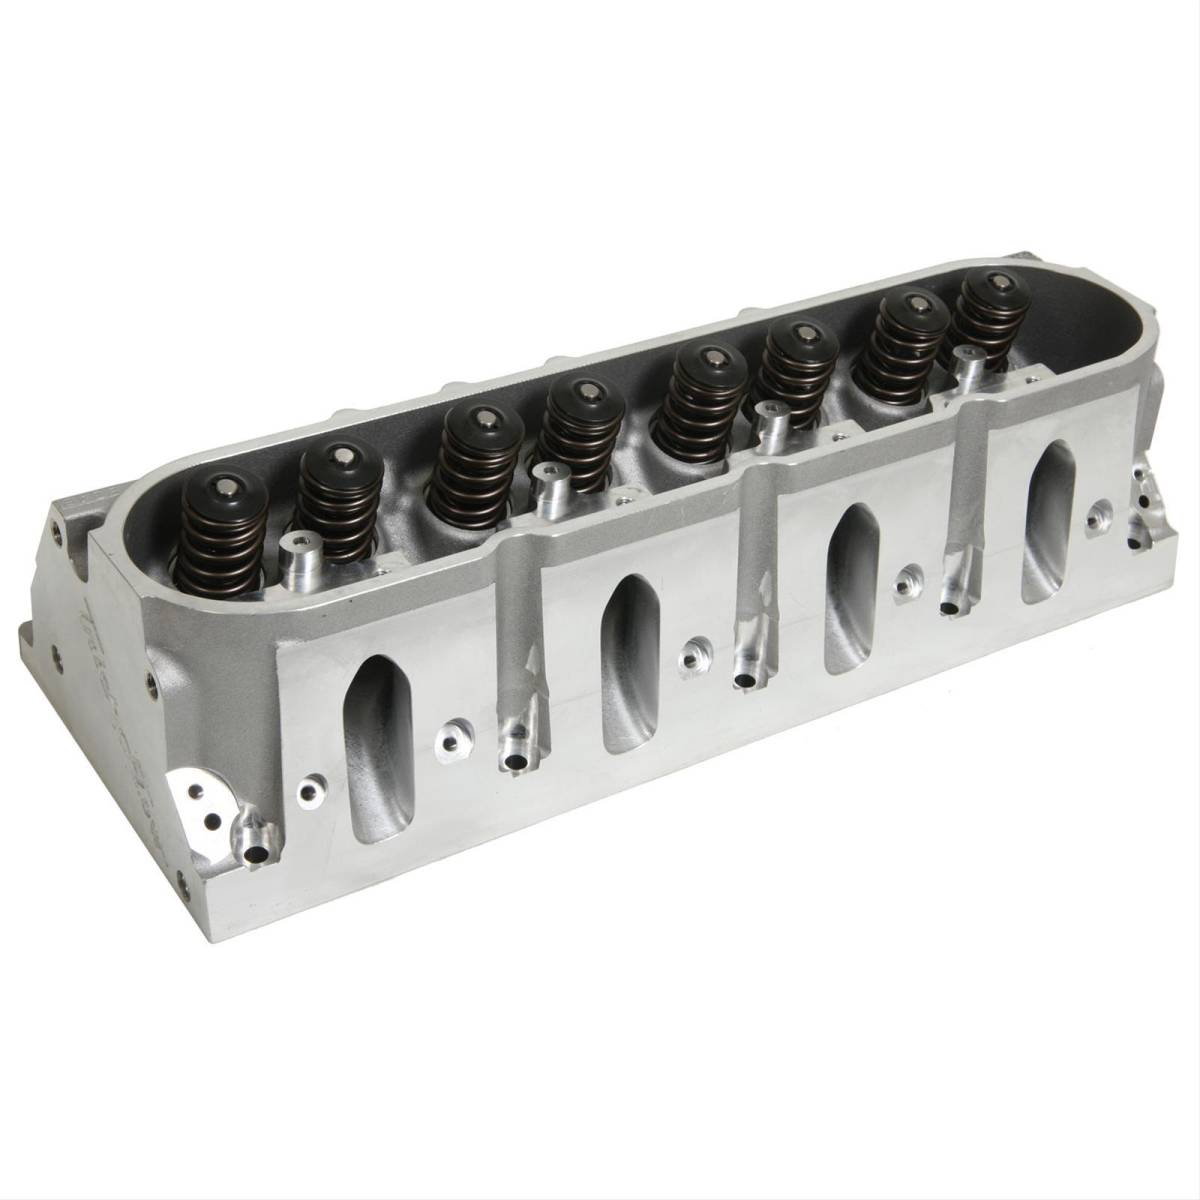 Trickflow - Trickflow GenX LS1 Cylinder Head, 220cc Intake, Chromoly Retainers, Max Lift .650 - Image 1